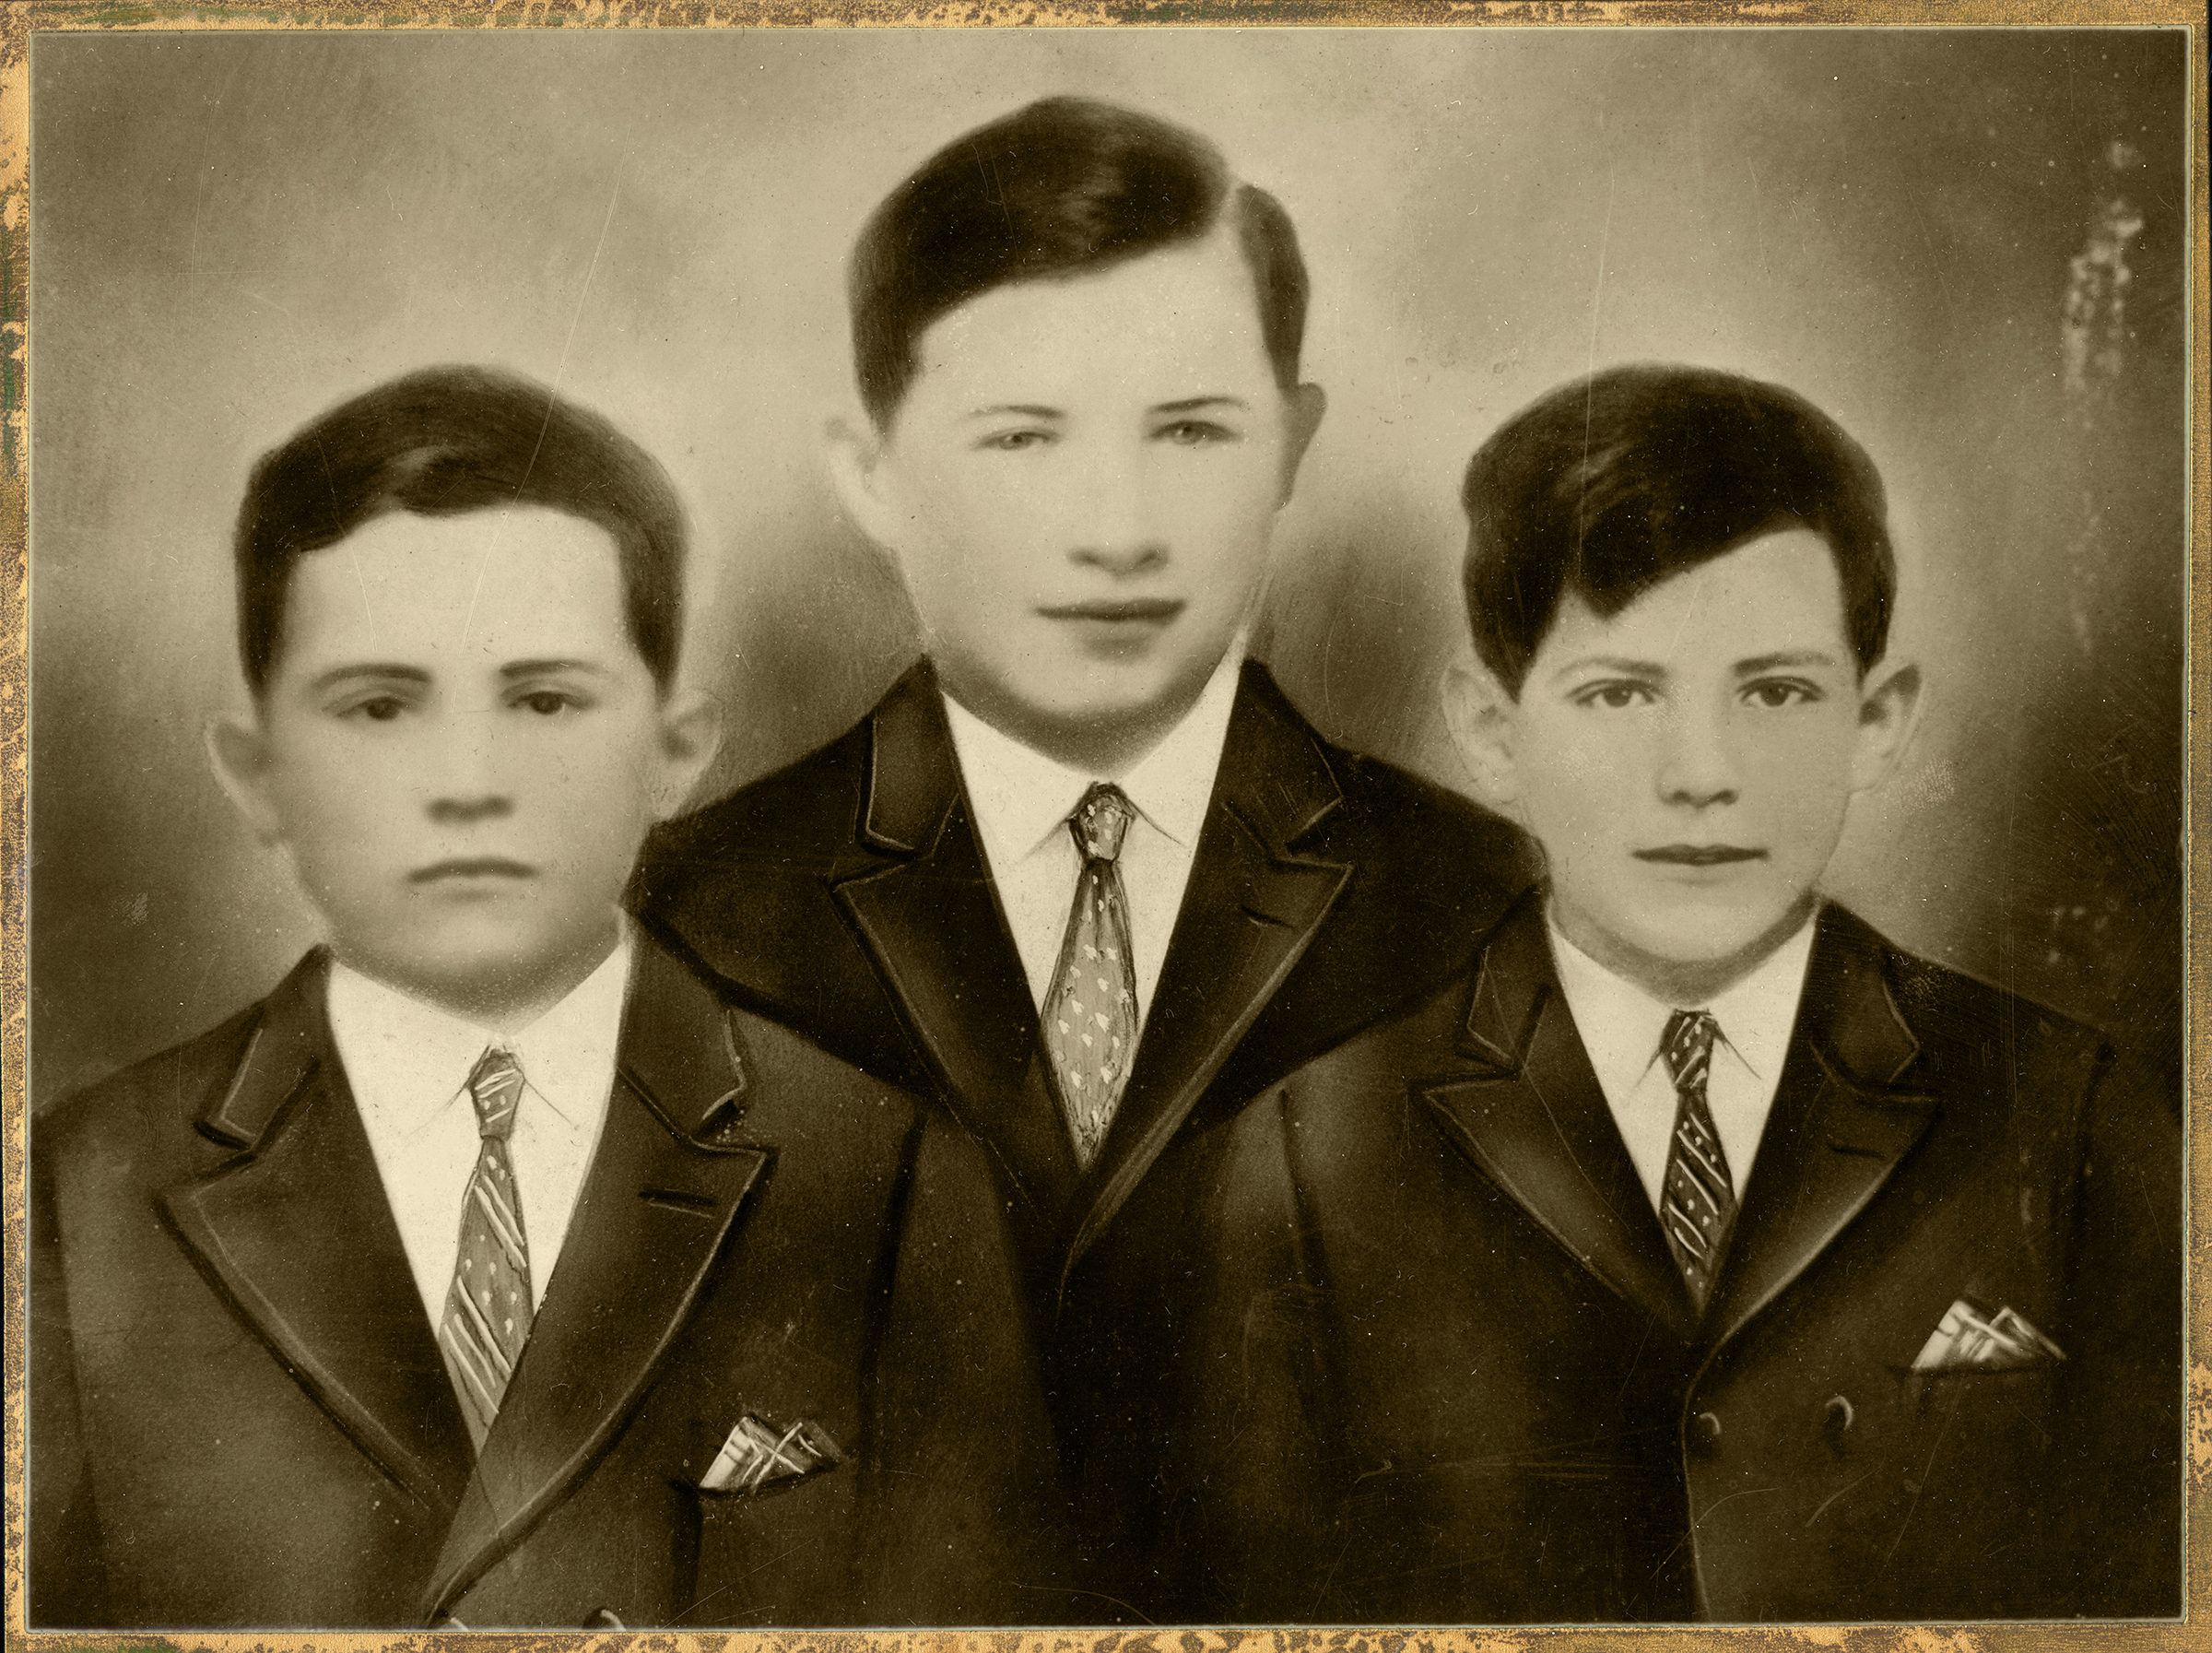 Reno, Joe Jr., Richard Gottardi
ST. FRANCIS DAM VICTIMS 
Reno (age 13), Joe Jr. (age 10) and Richard Gottardi (age 8), victims of the St. Francis Dam Disaster of March 12-13, 1928. Their mother and their two younger sisters also perished